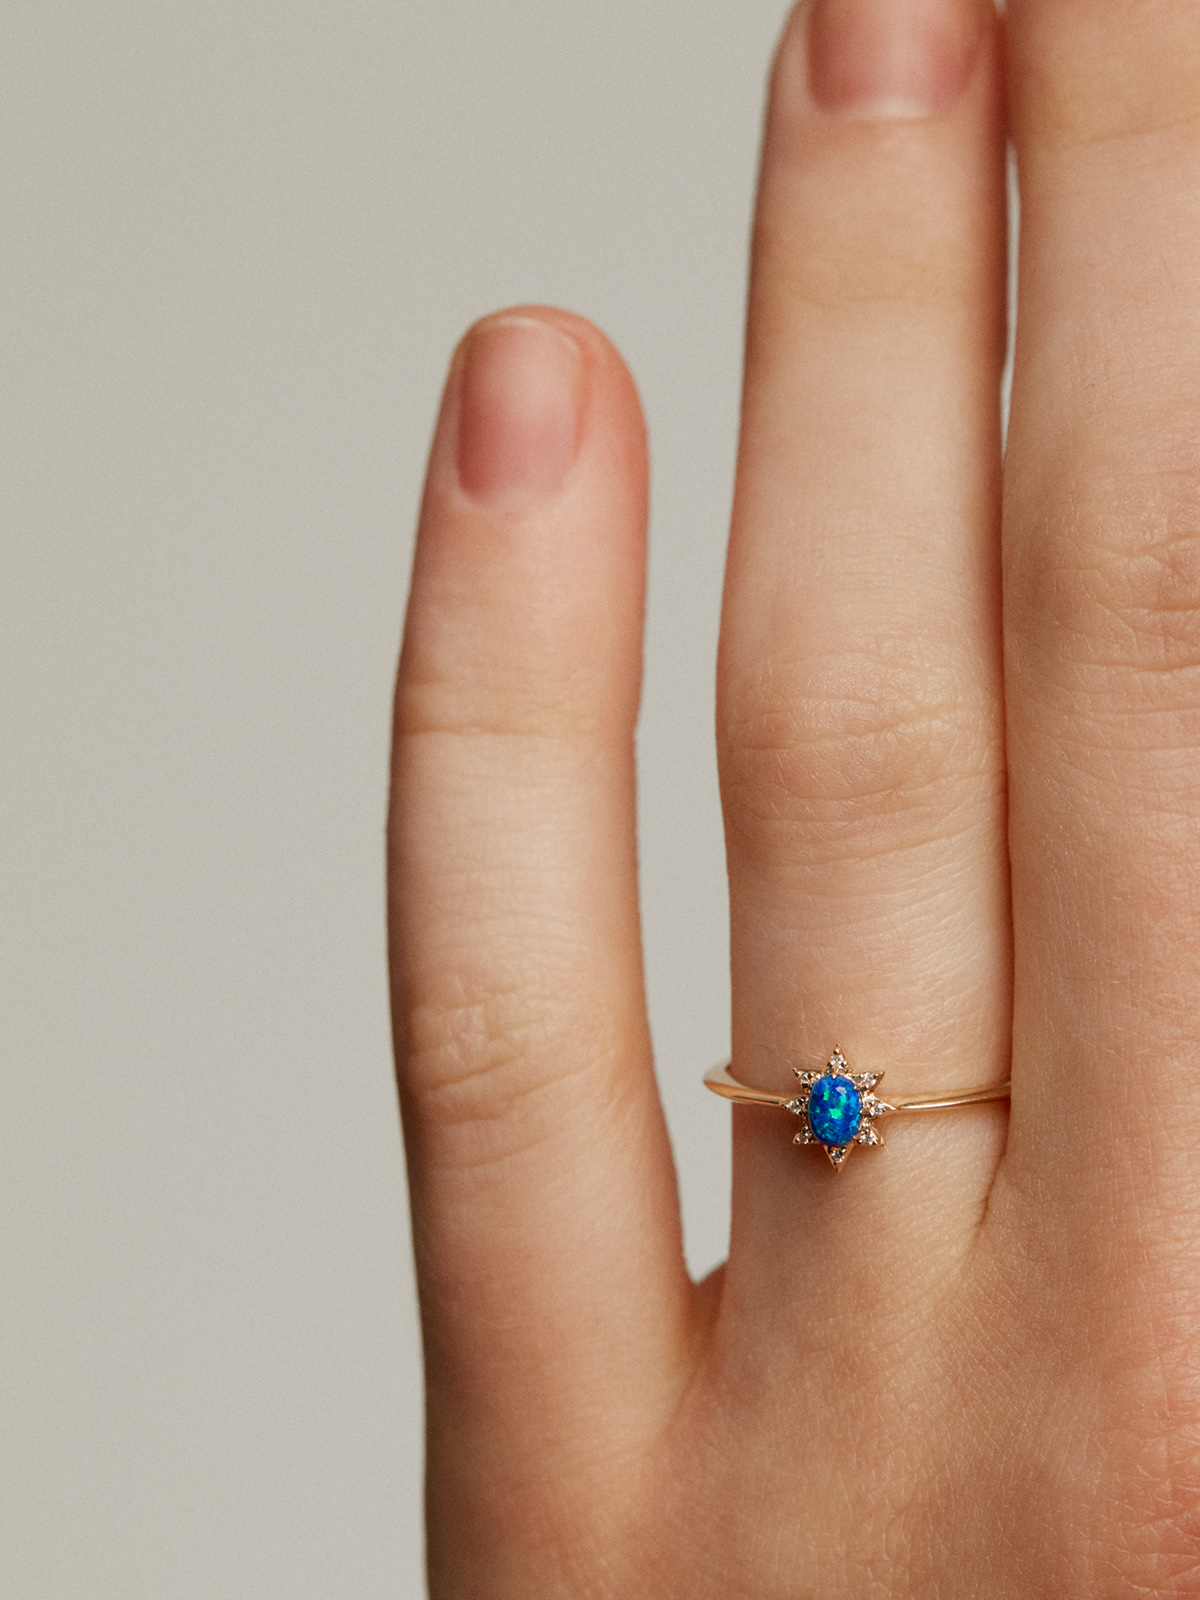 18K yellow gold ring with lab-grown blue opal and white diamonds.